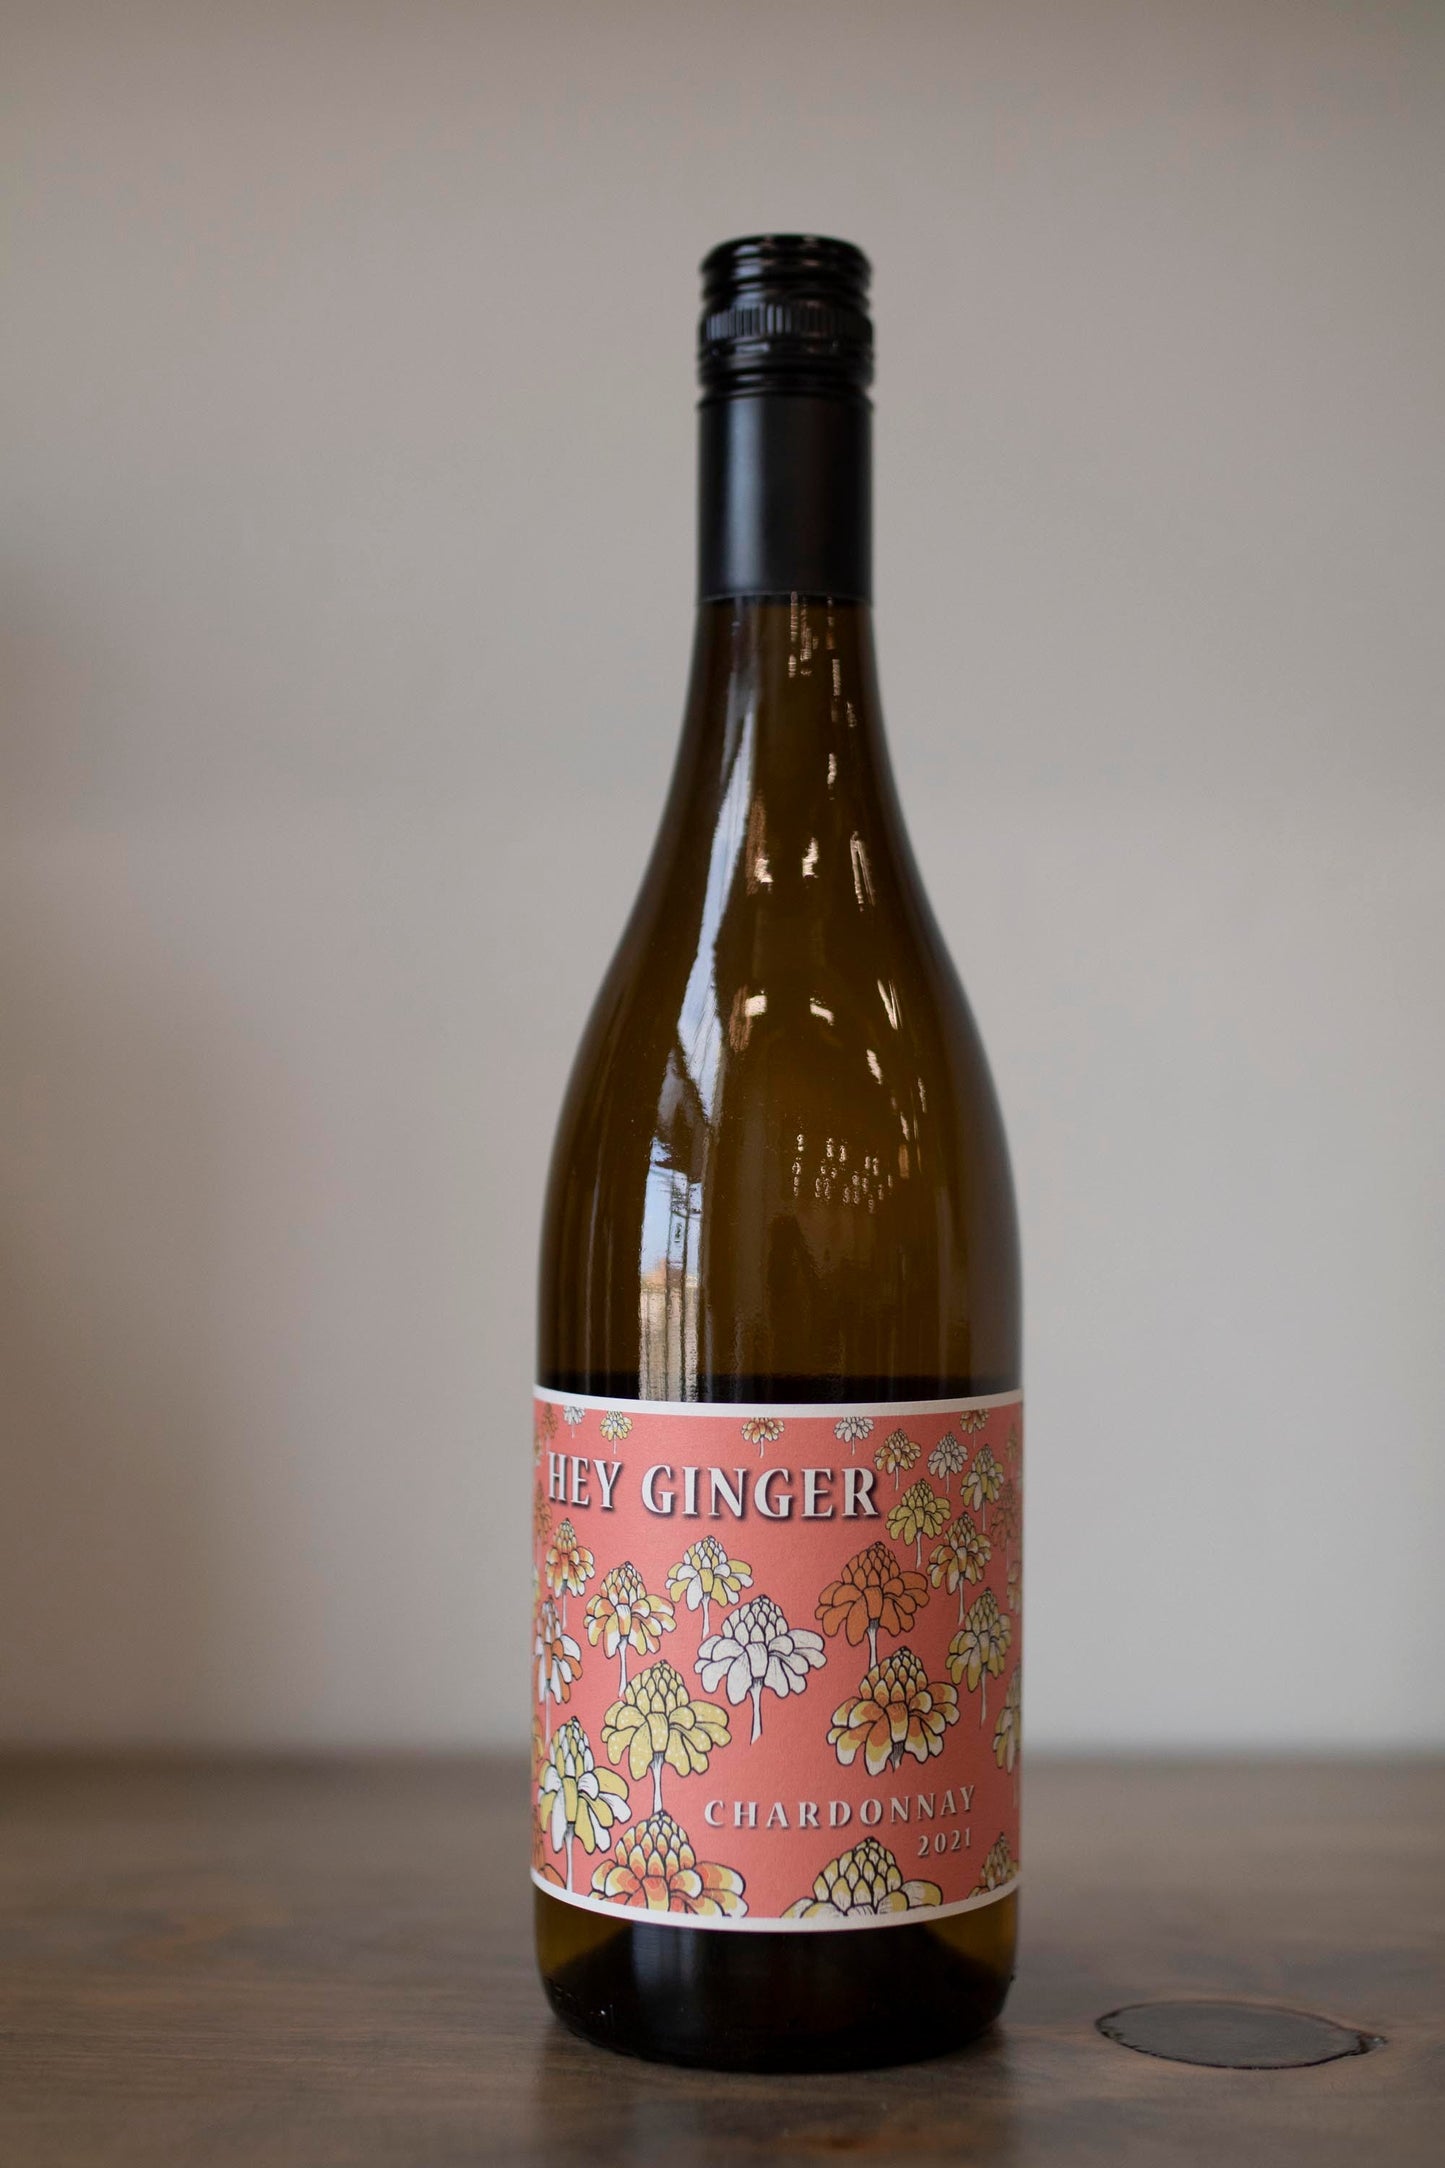 Bottle of Hey Ginger Chardonnay found at Vine & Board in 3809 NW 166th St Suite 1, Edmond, OK 73012